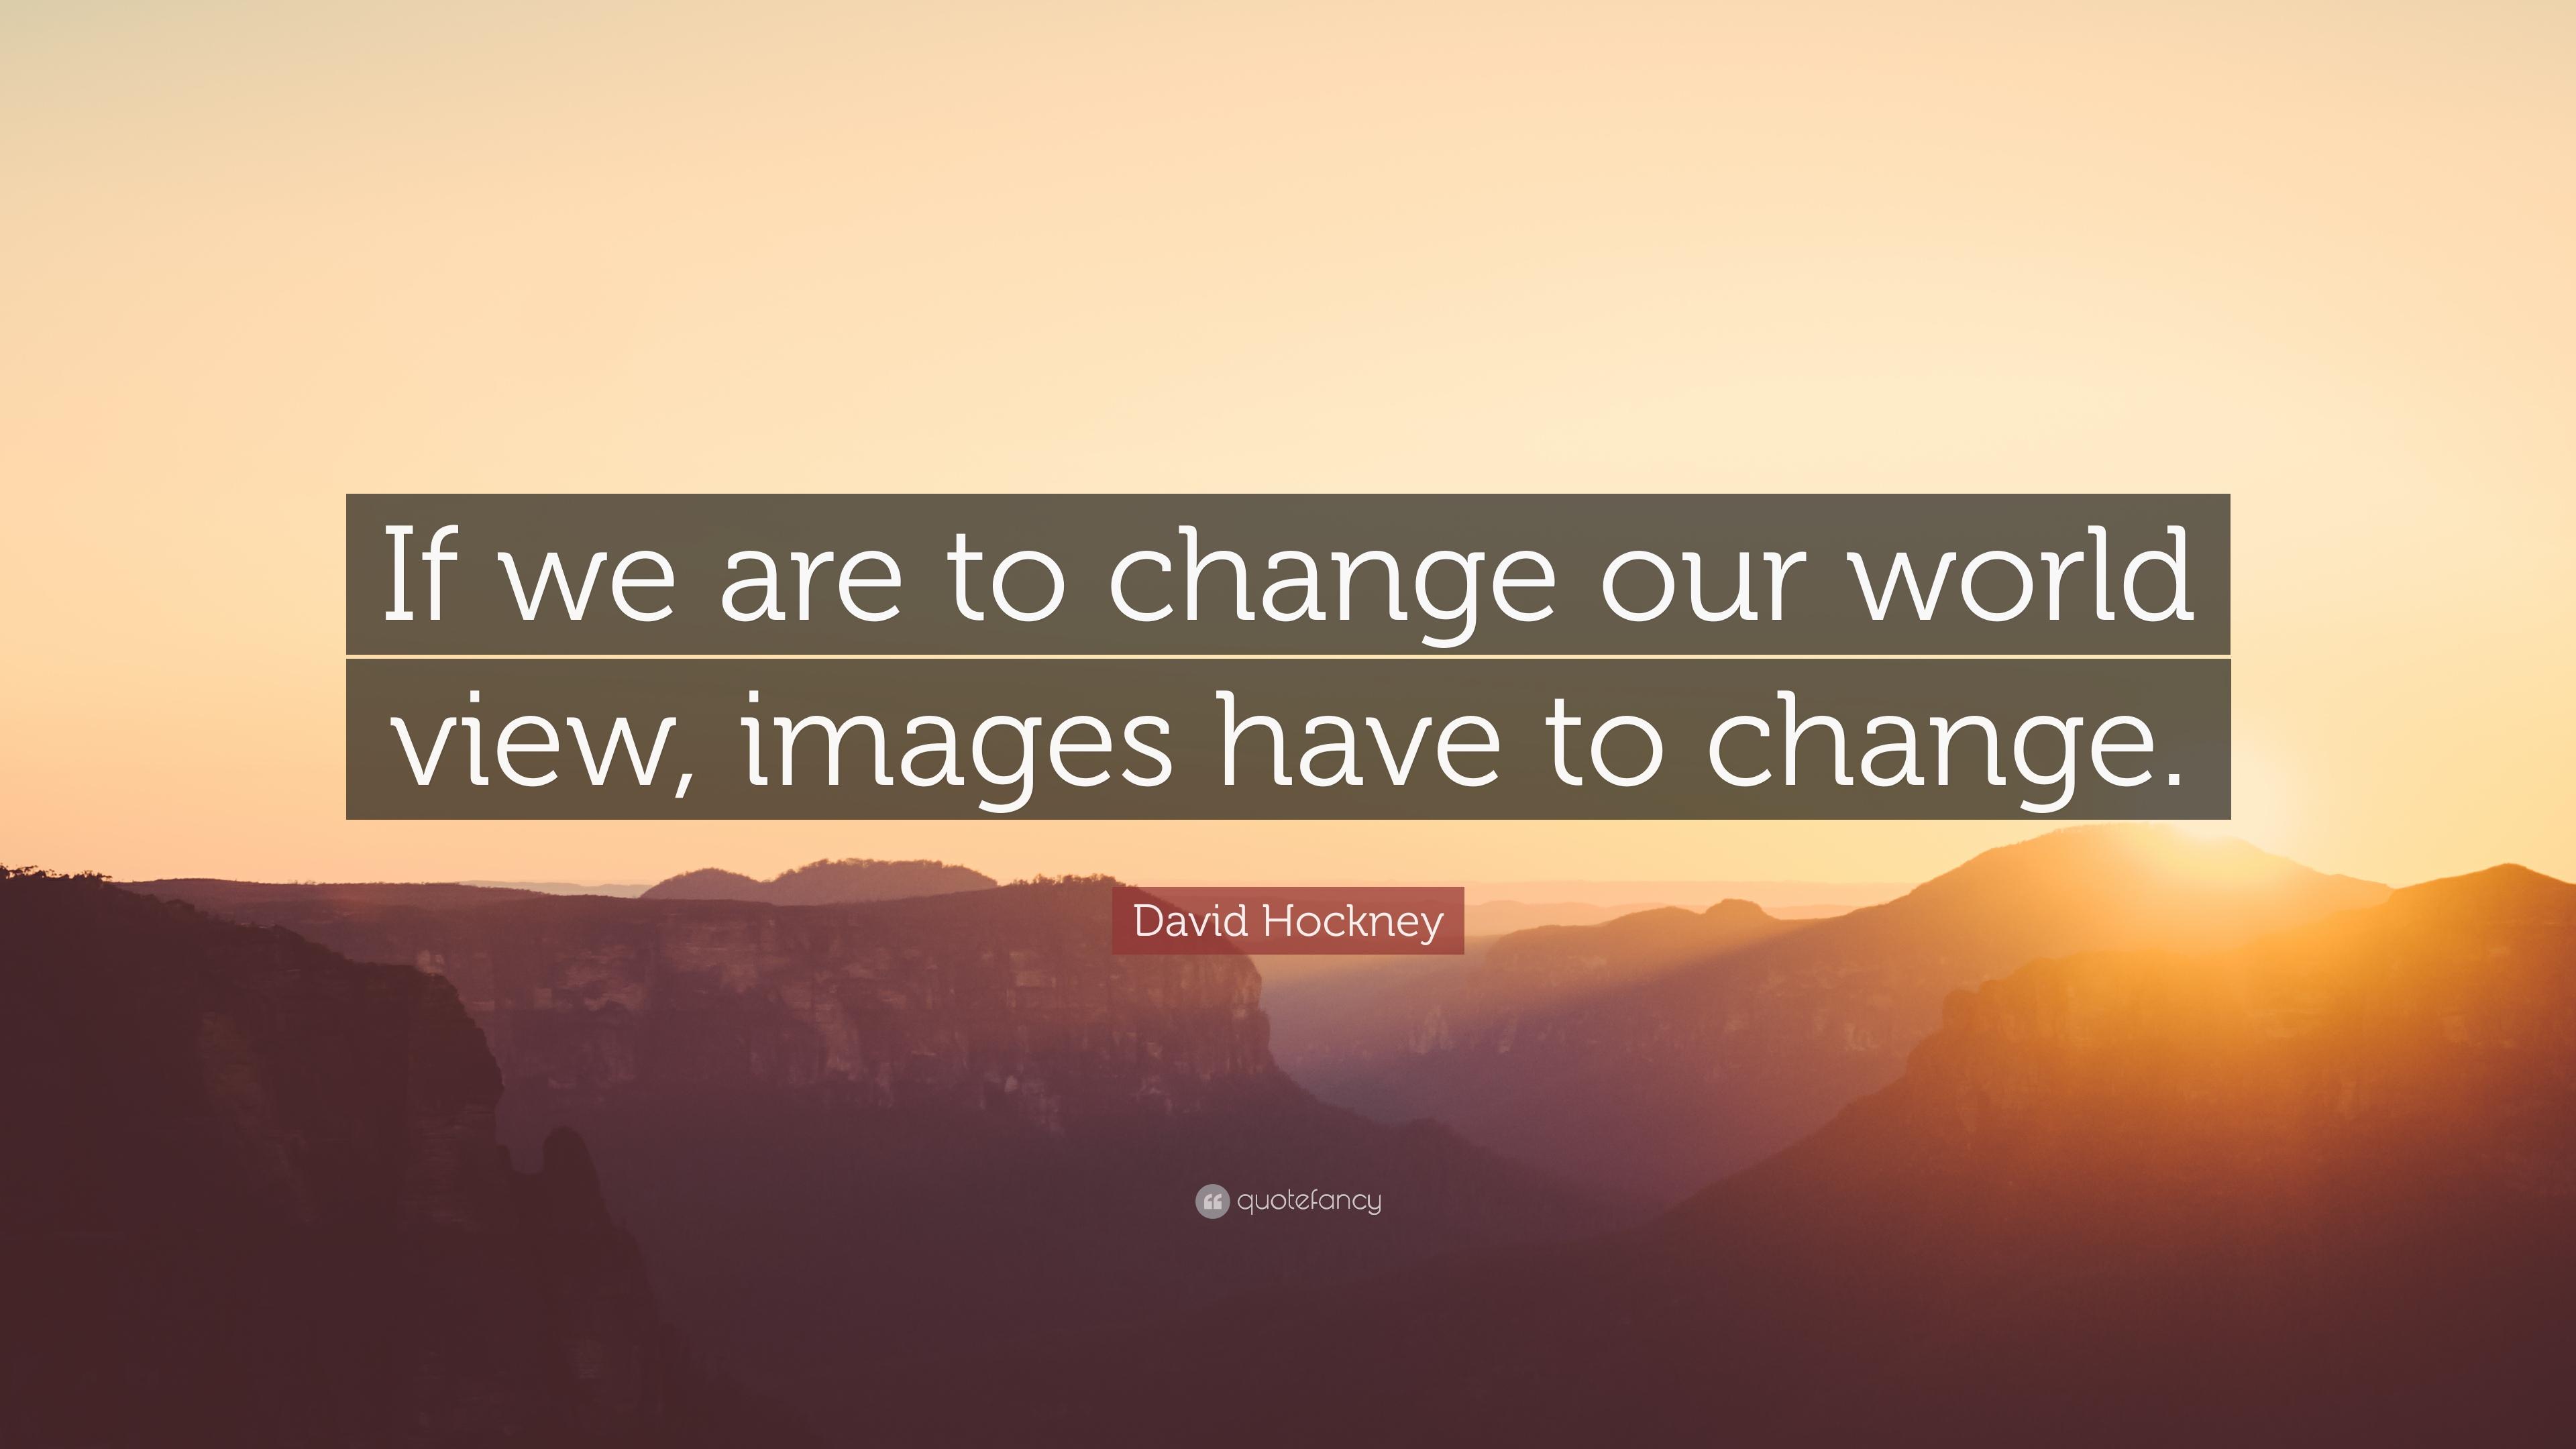 David Hockney Quote: “If we are to change our world view, image